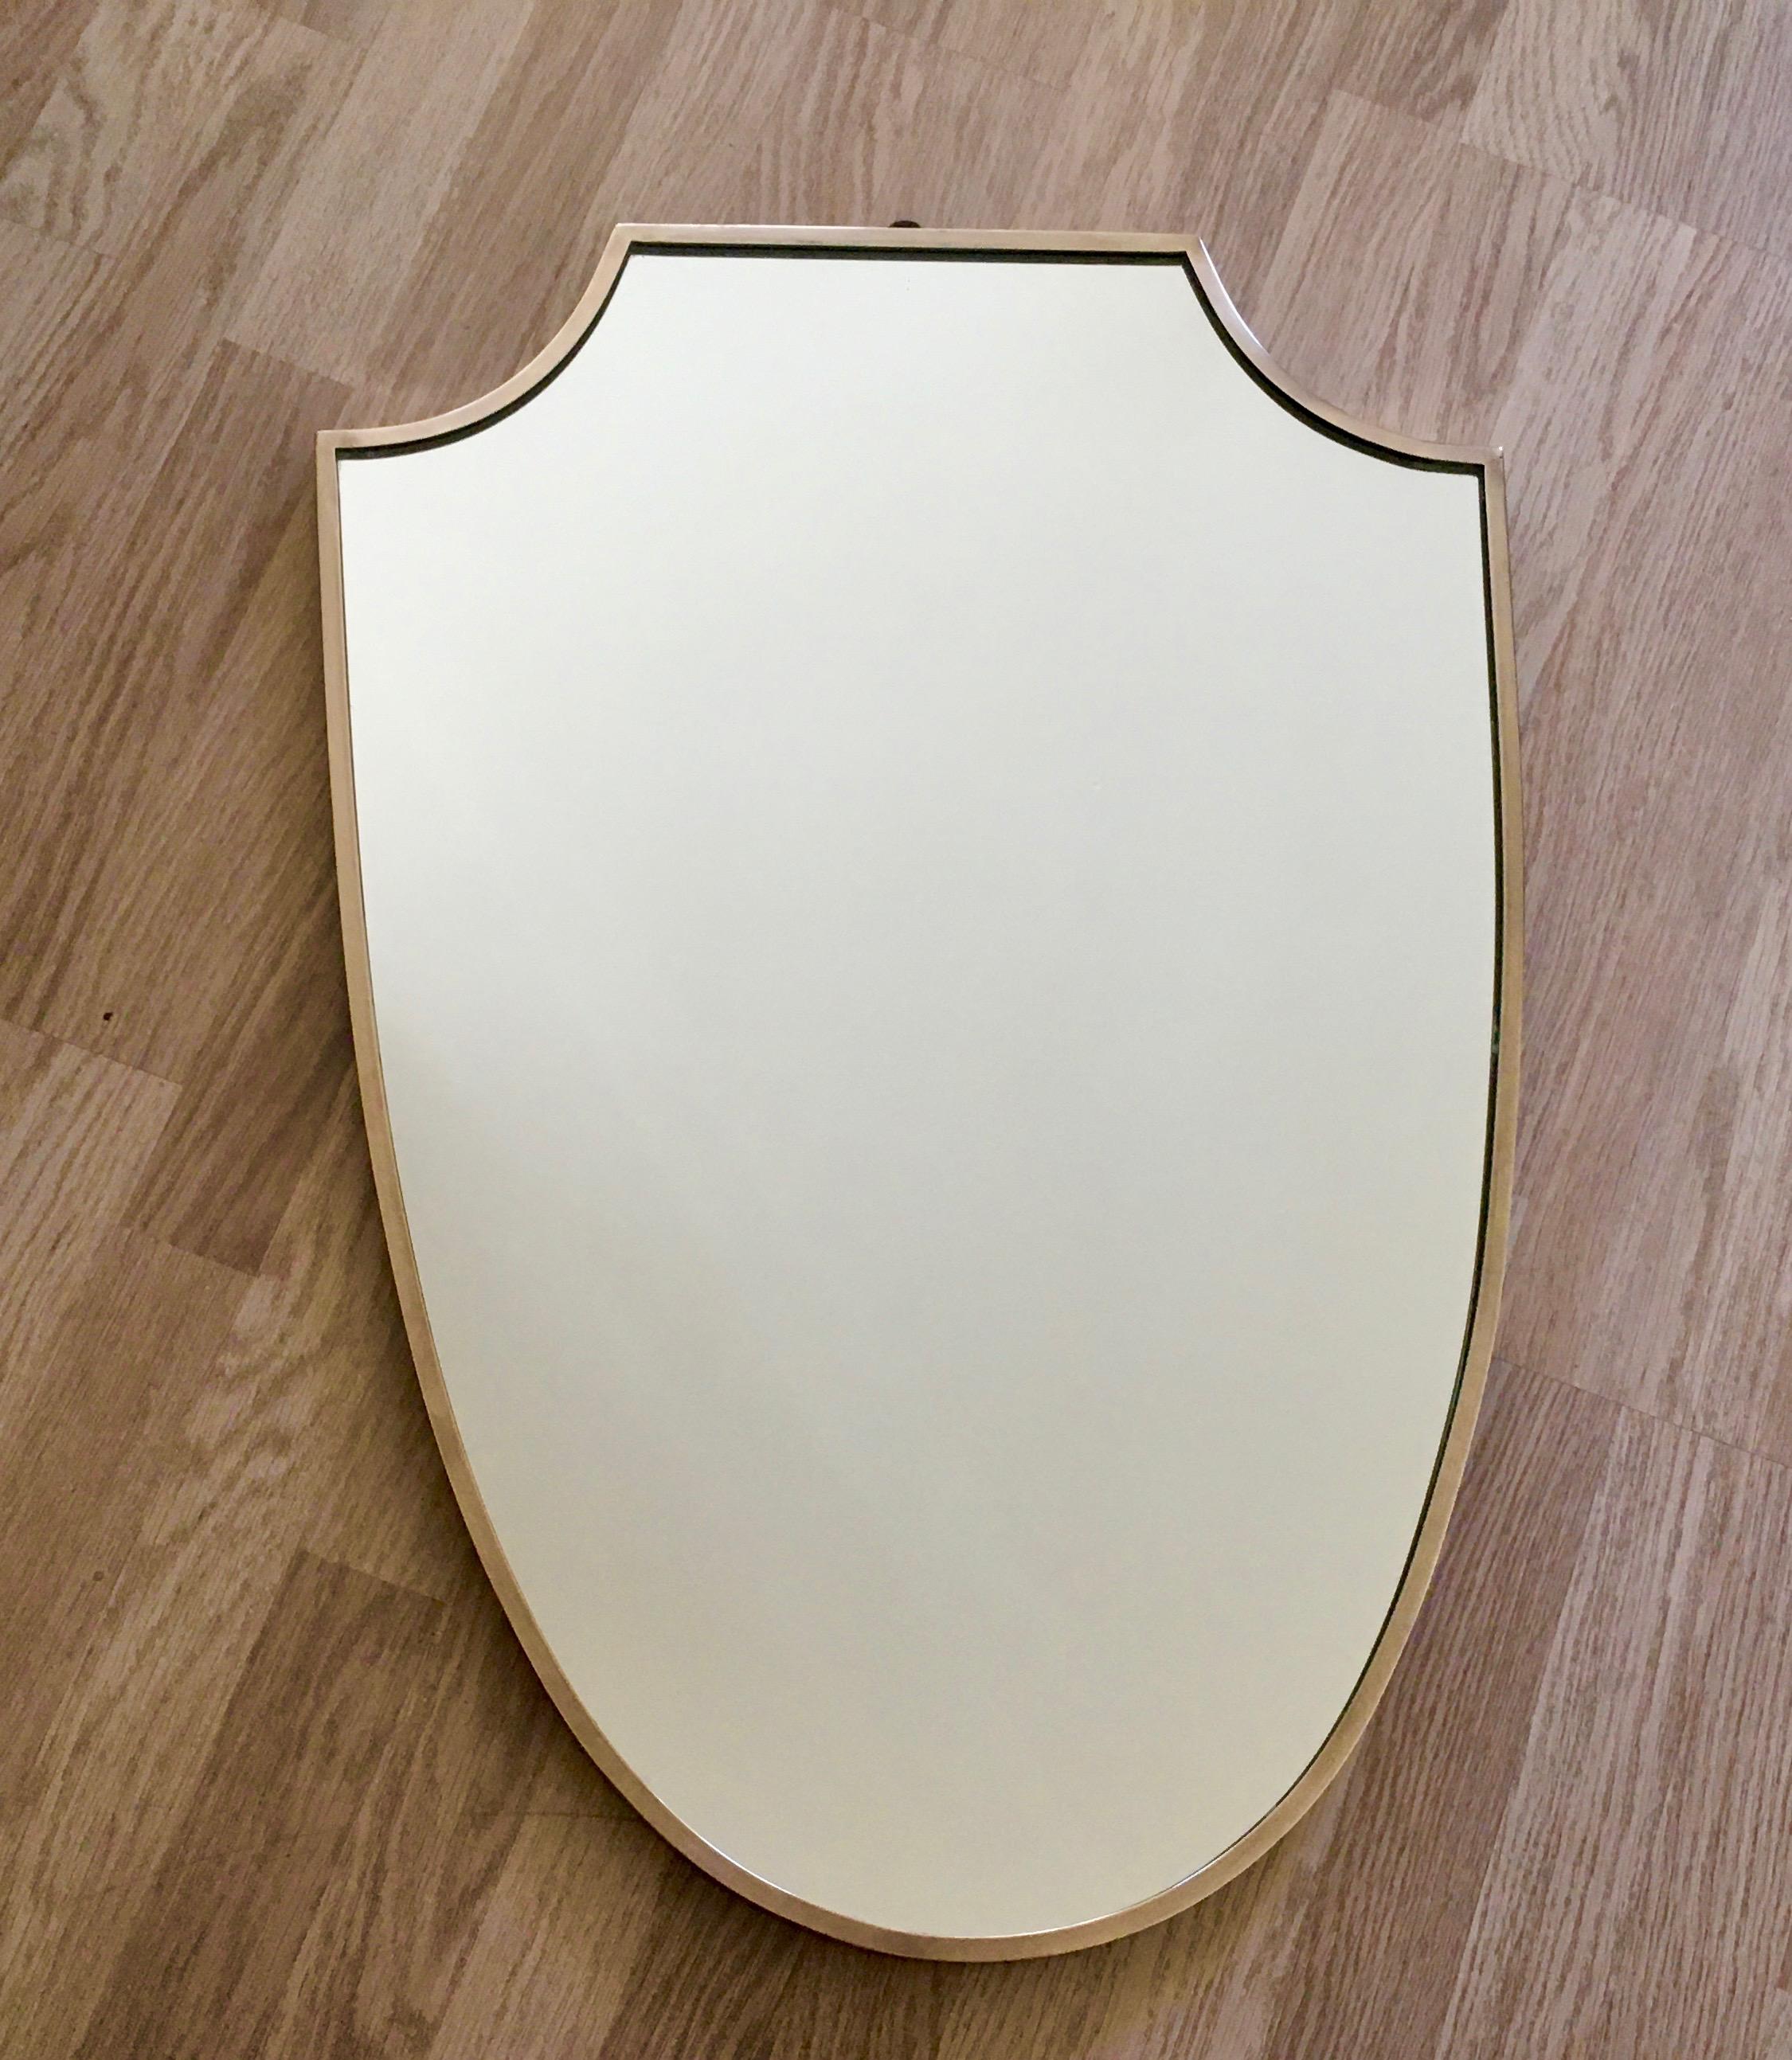 Brass shield-shaped wall mirror on a wood base.
Attributed to Gio Ponti.
Unsigned.
Italy 1950.